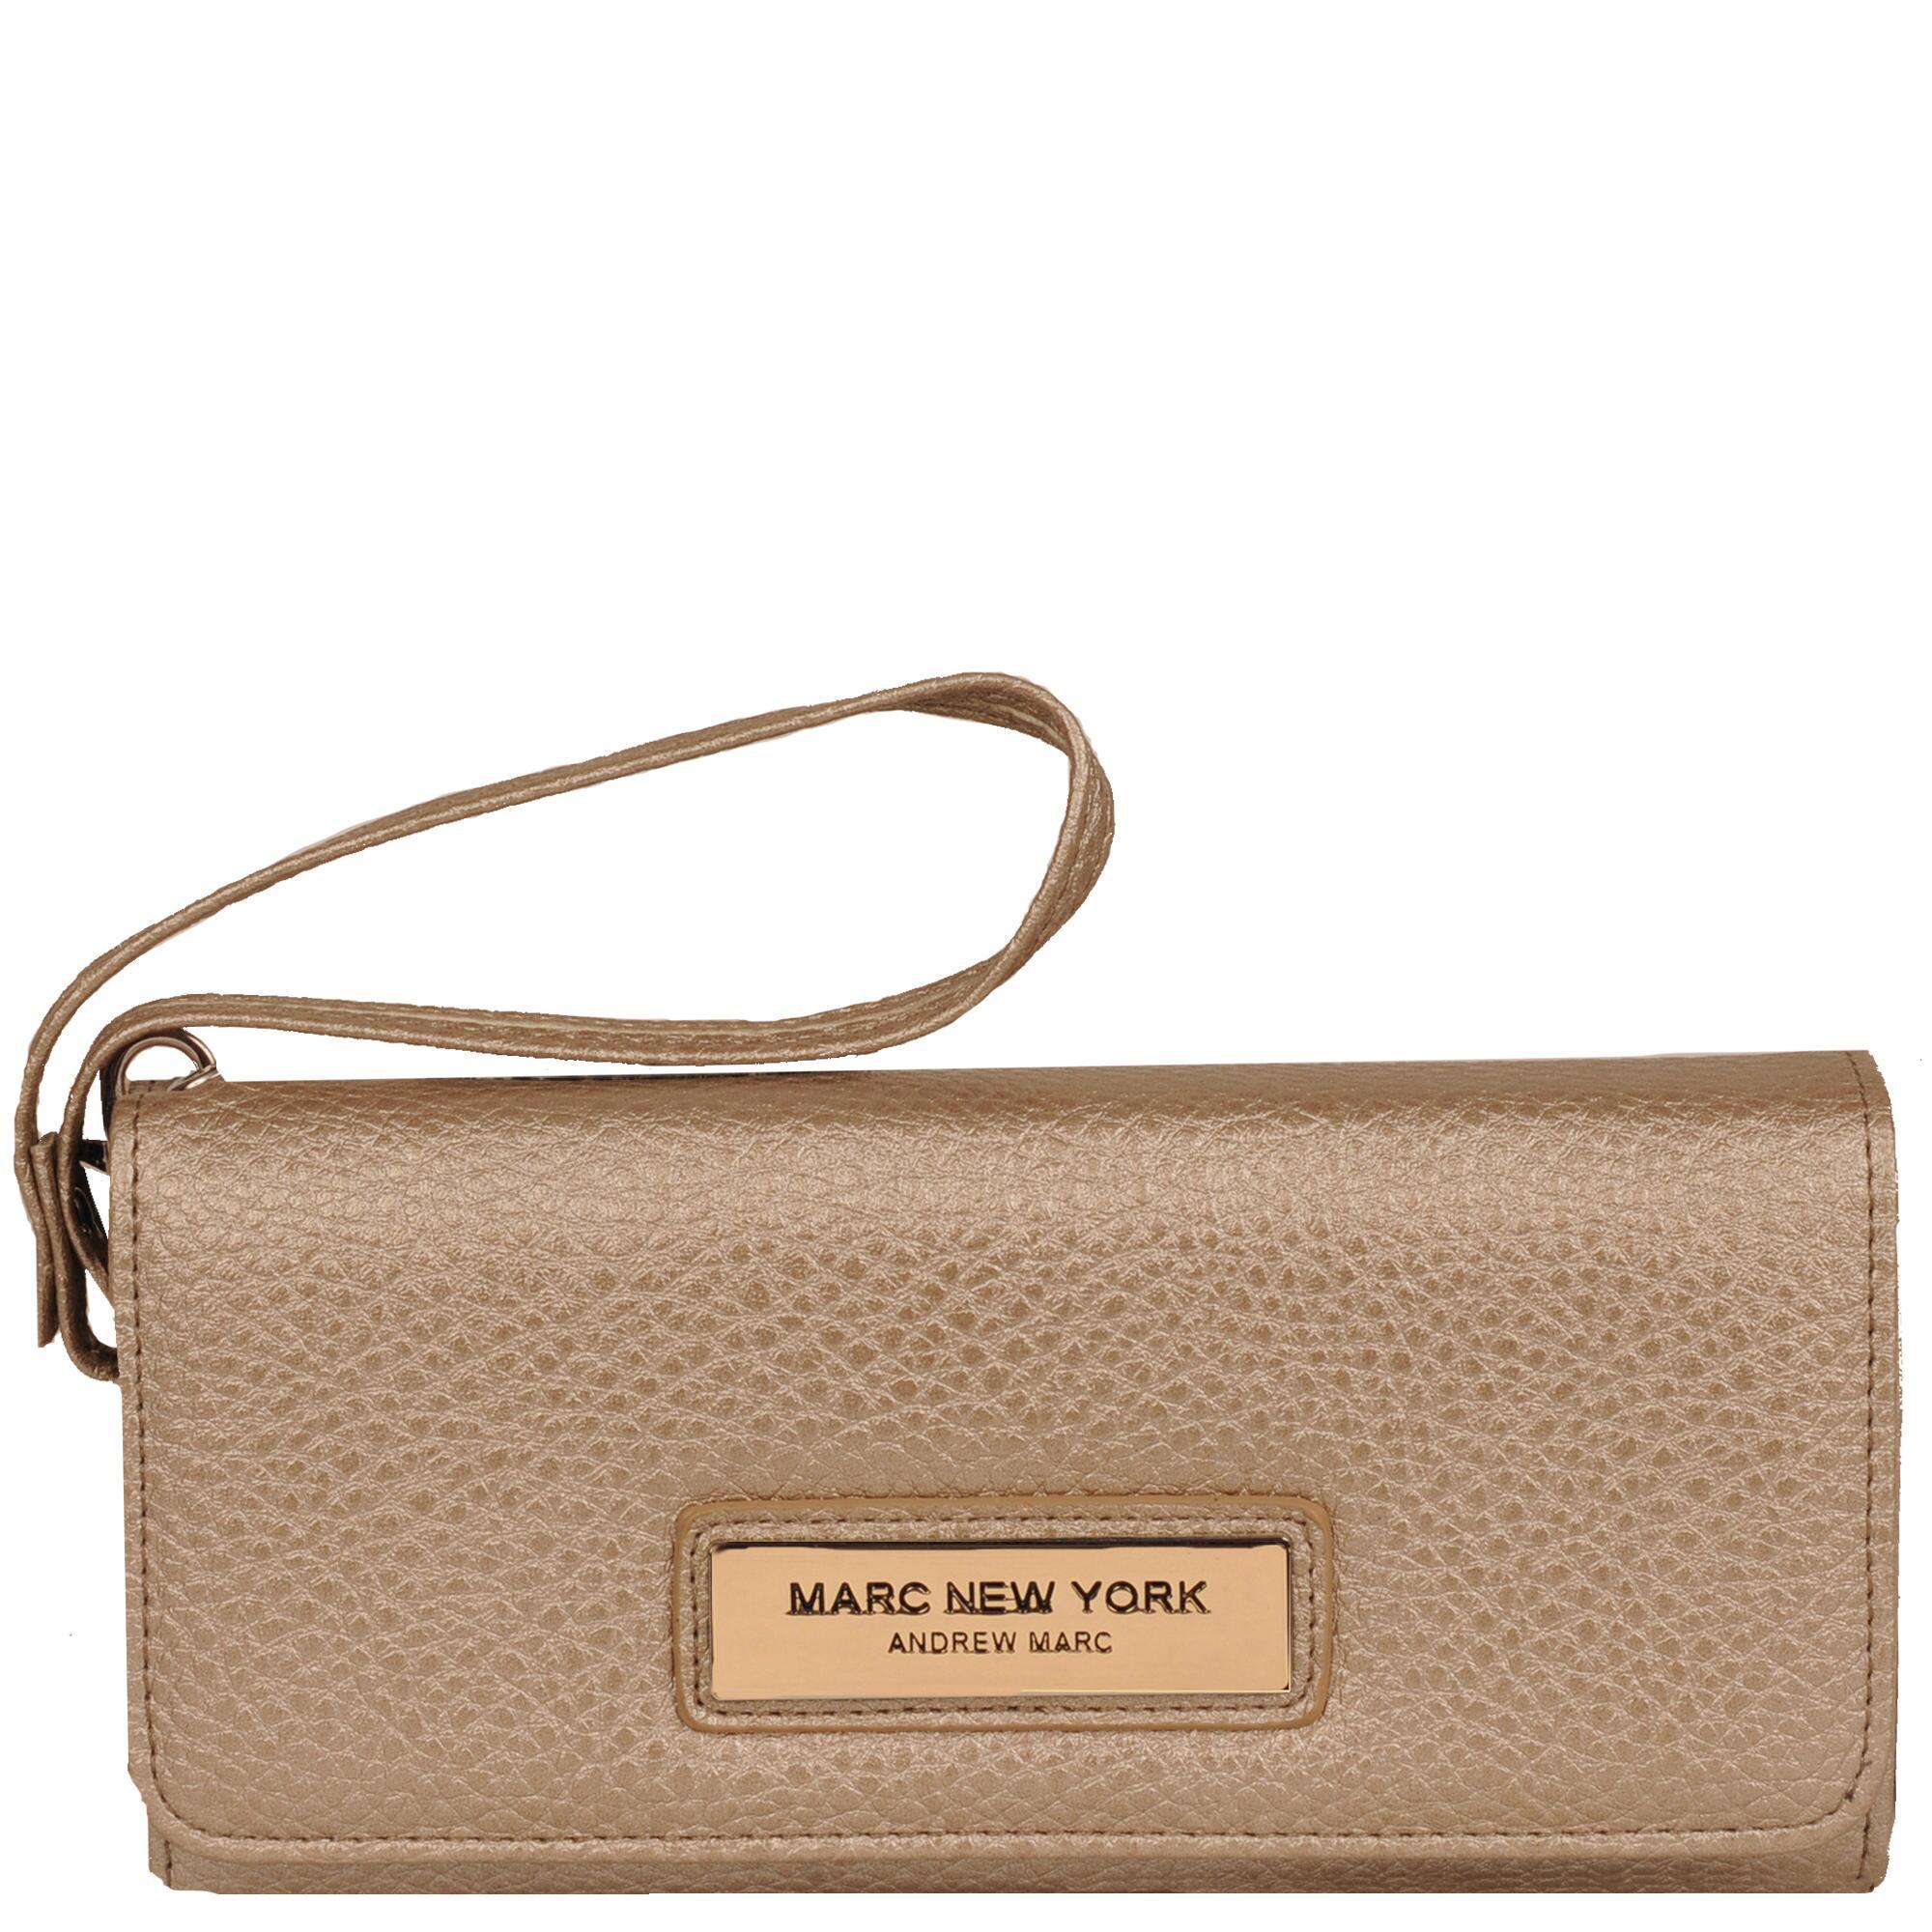 Wilsons Leather Marc New York Fold Over Faux-leather Wallet in Gold (Metallic) - Lyst